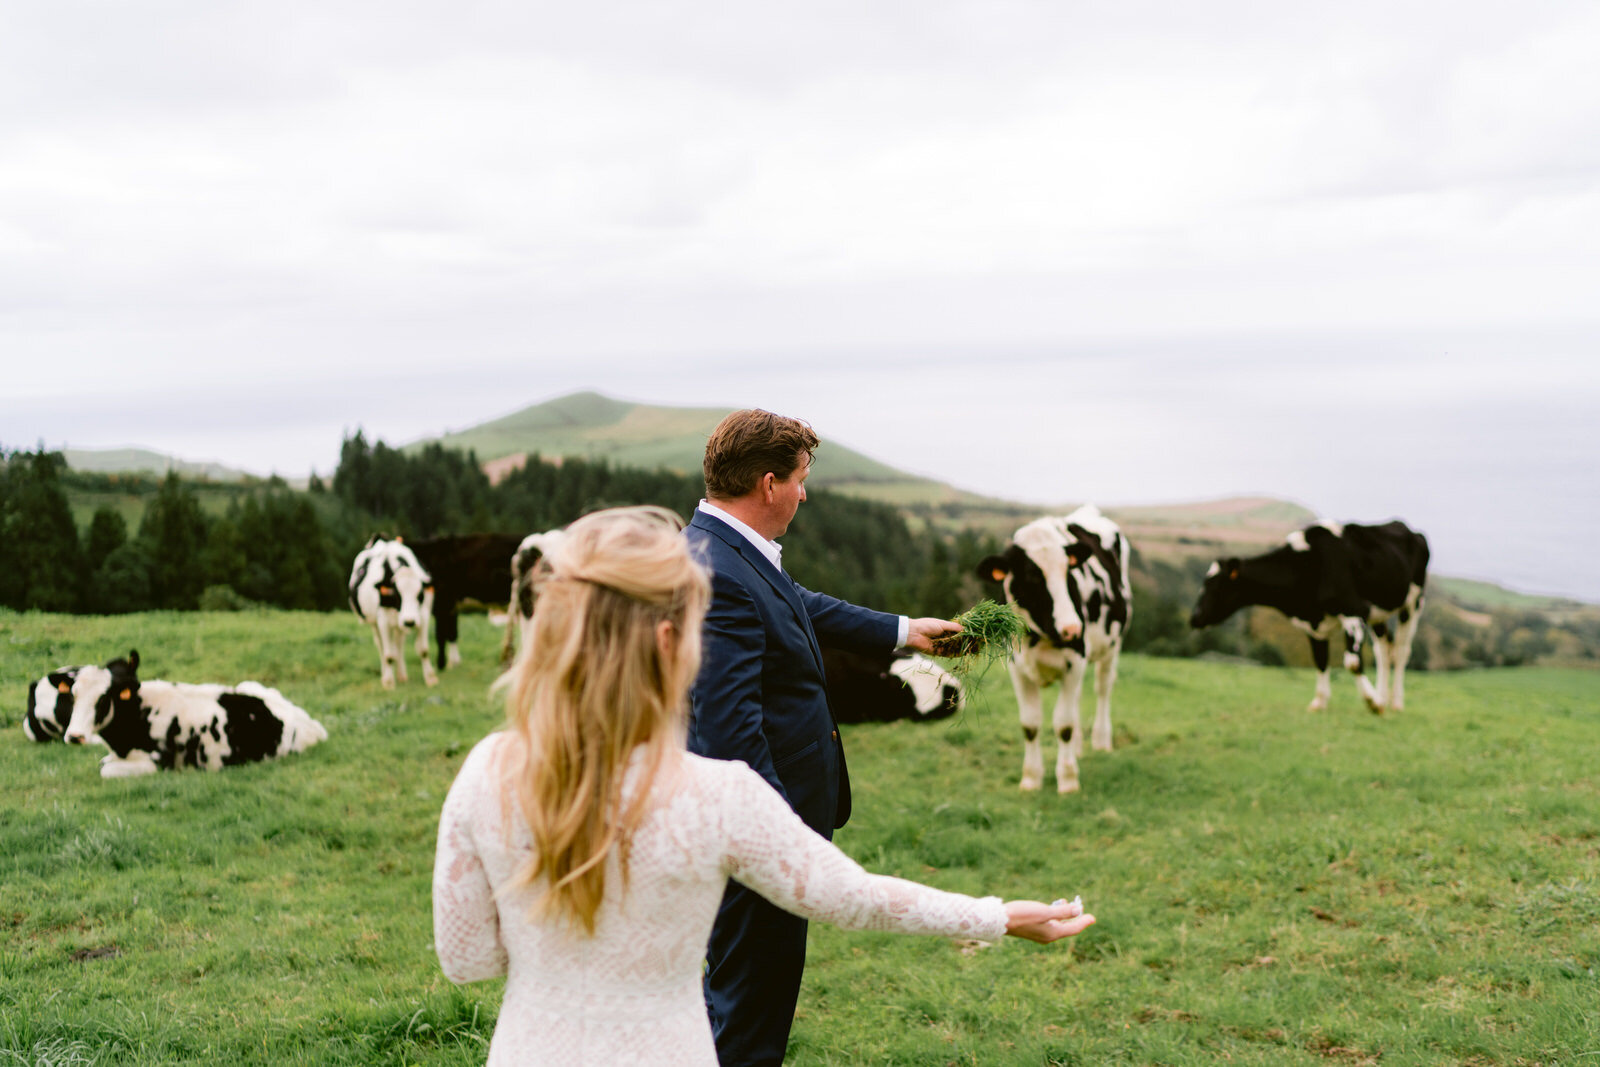 Elopement in the Azores. Cpuple getting married in Portugal. Elopement photography in Europe. Epic locations to elope in the world. Sao Miquel island Azores wedding (53).jpg